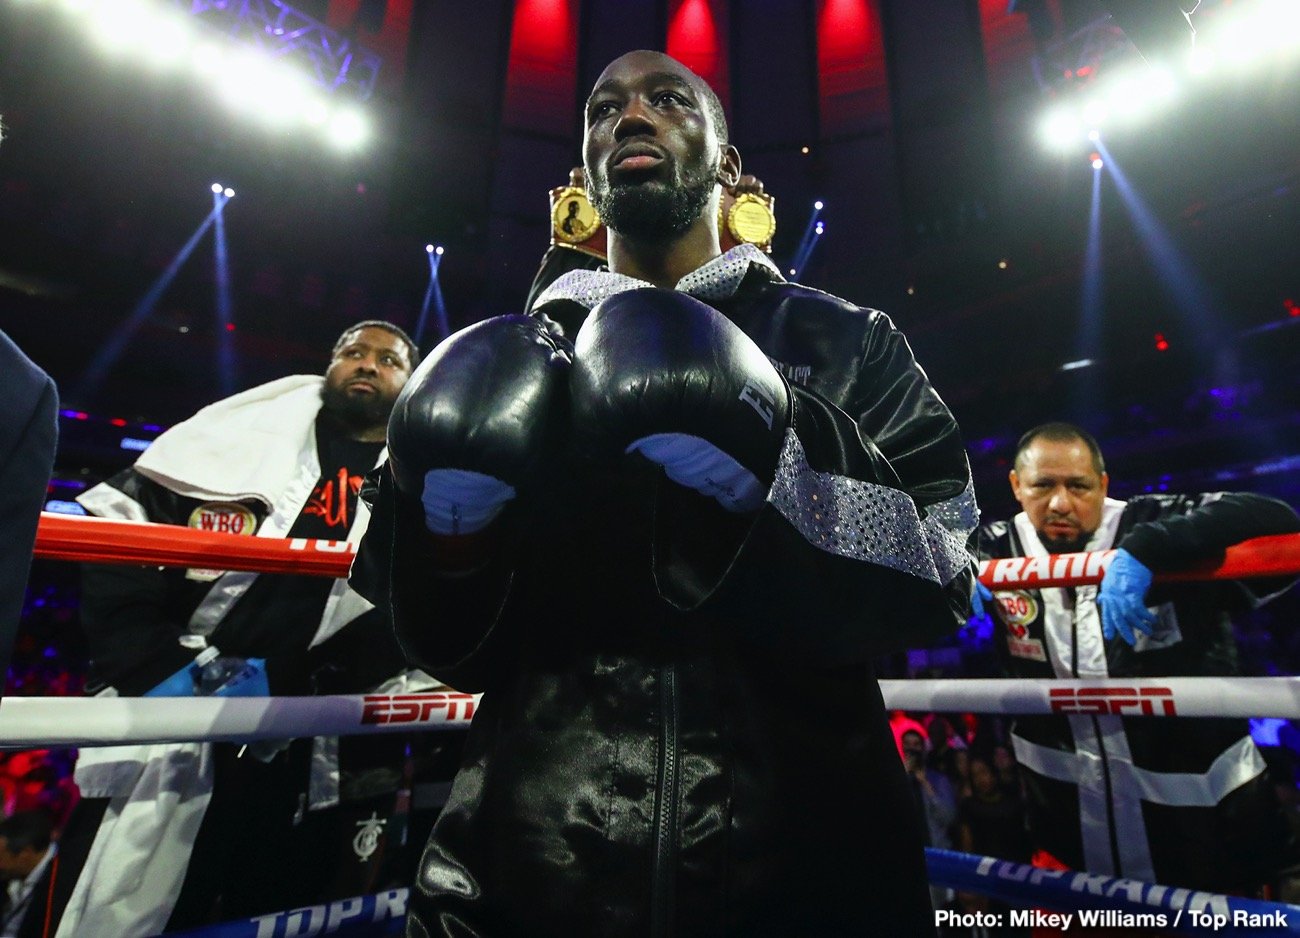 Image: Crawford says Errol Spence will 'CRY' after he knocks him out